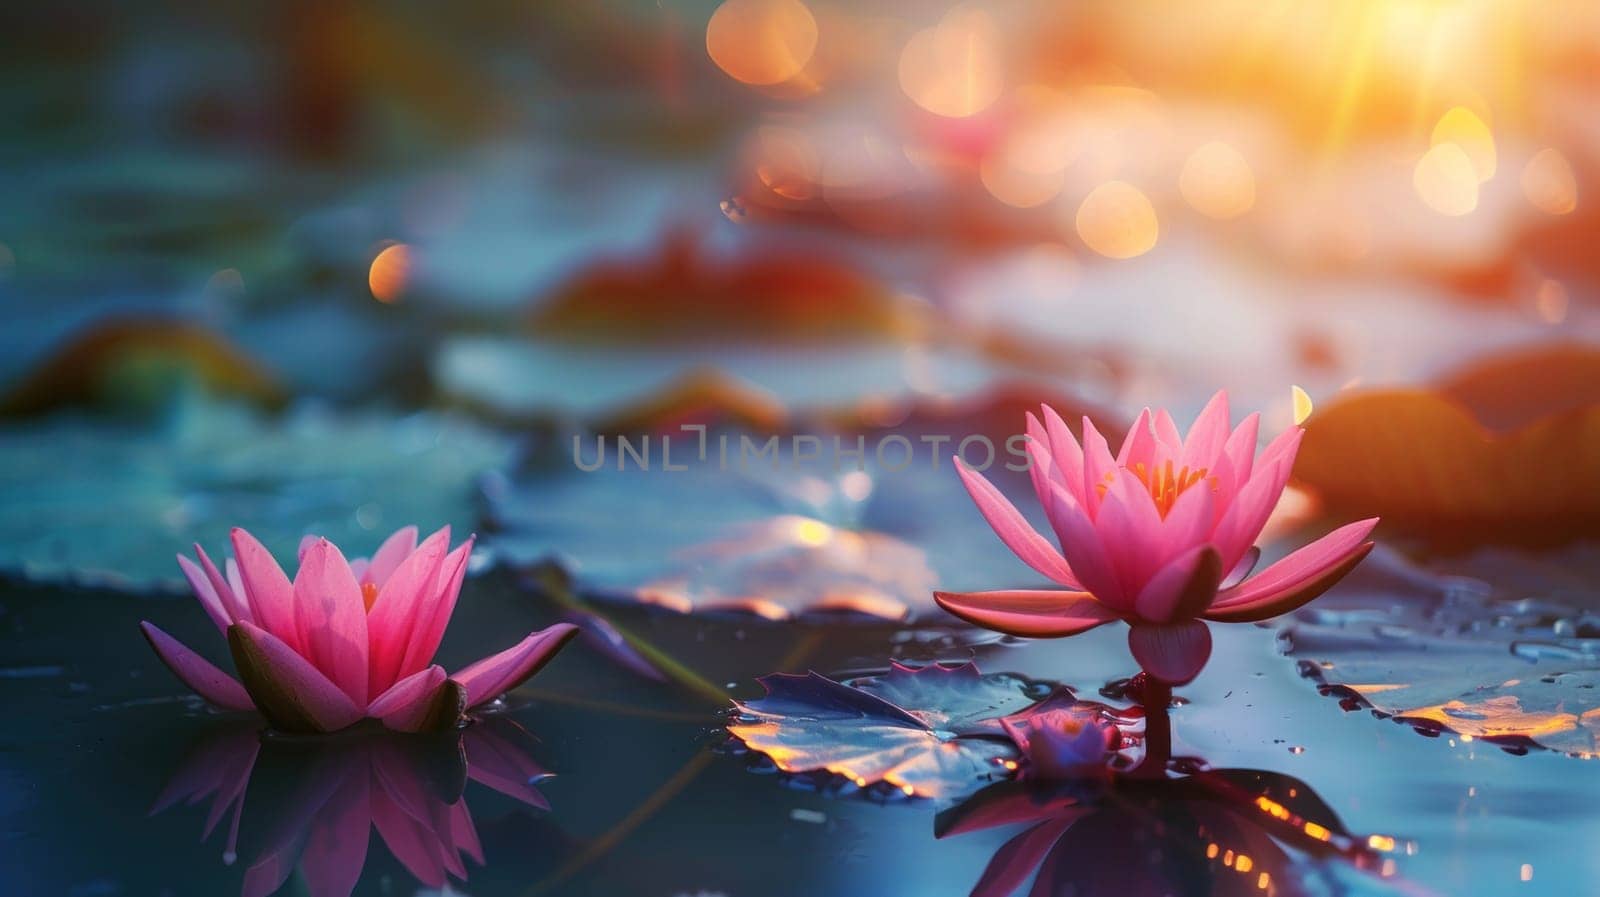 Lotus Flowers Blooming in Pond with Macro Lens Under Natural Light Concept Tranquil Summer Atmosphere.